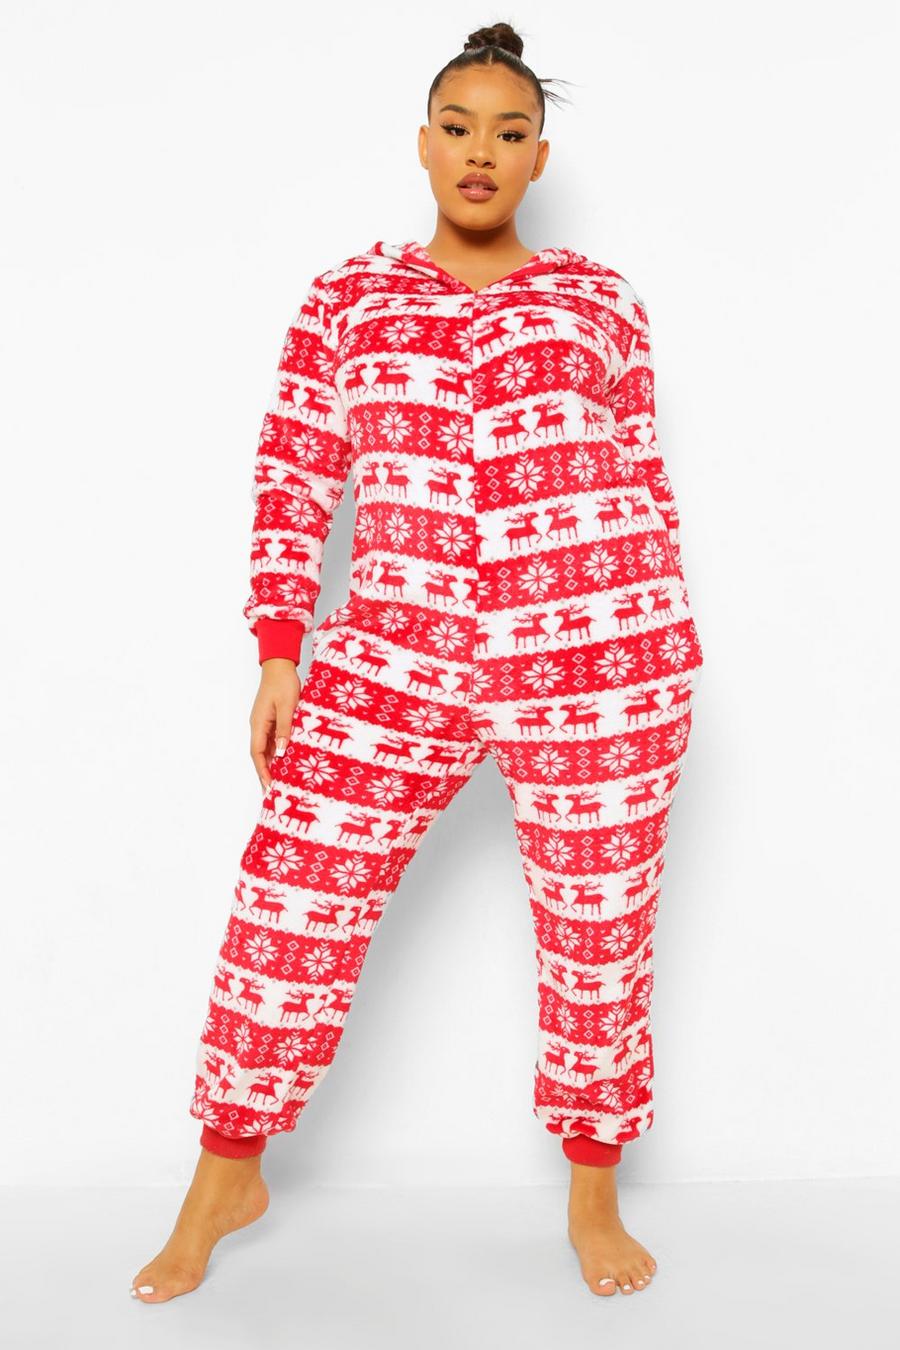 Alexander Del Rossa Women's Hooded Footed Pajamas, Plush, 45% OFF